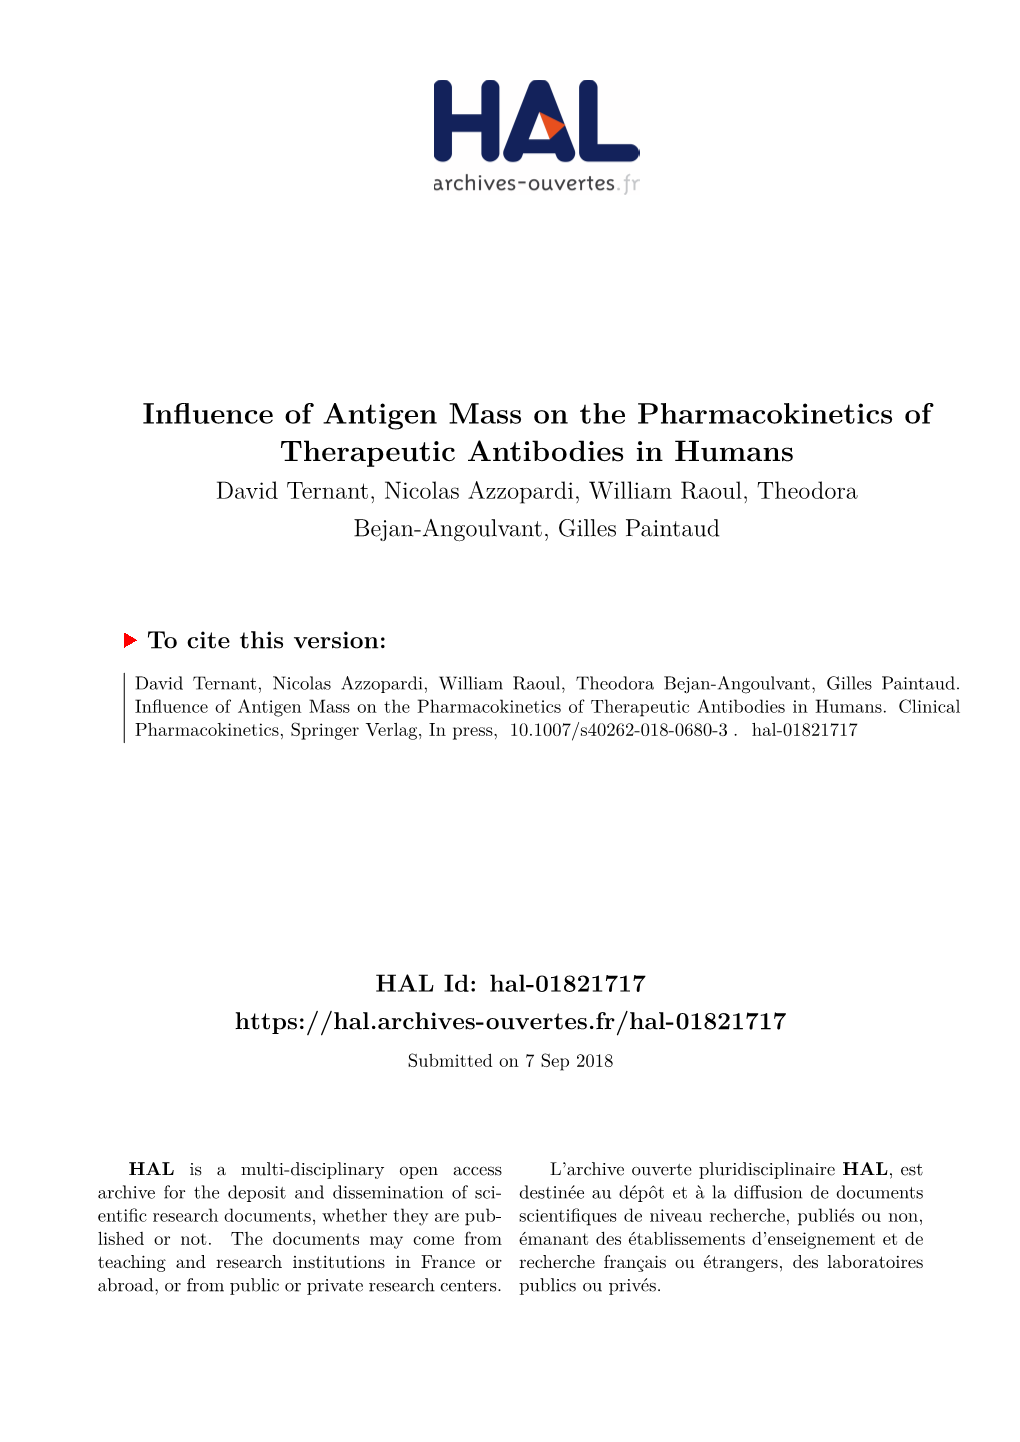 Influence of Antigen Mass on the Pharmacokinetics of Therapeutic